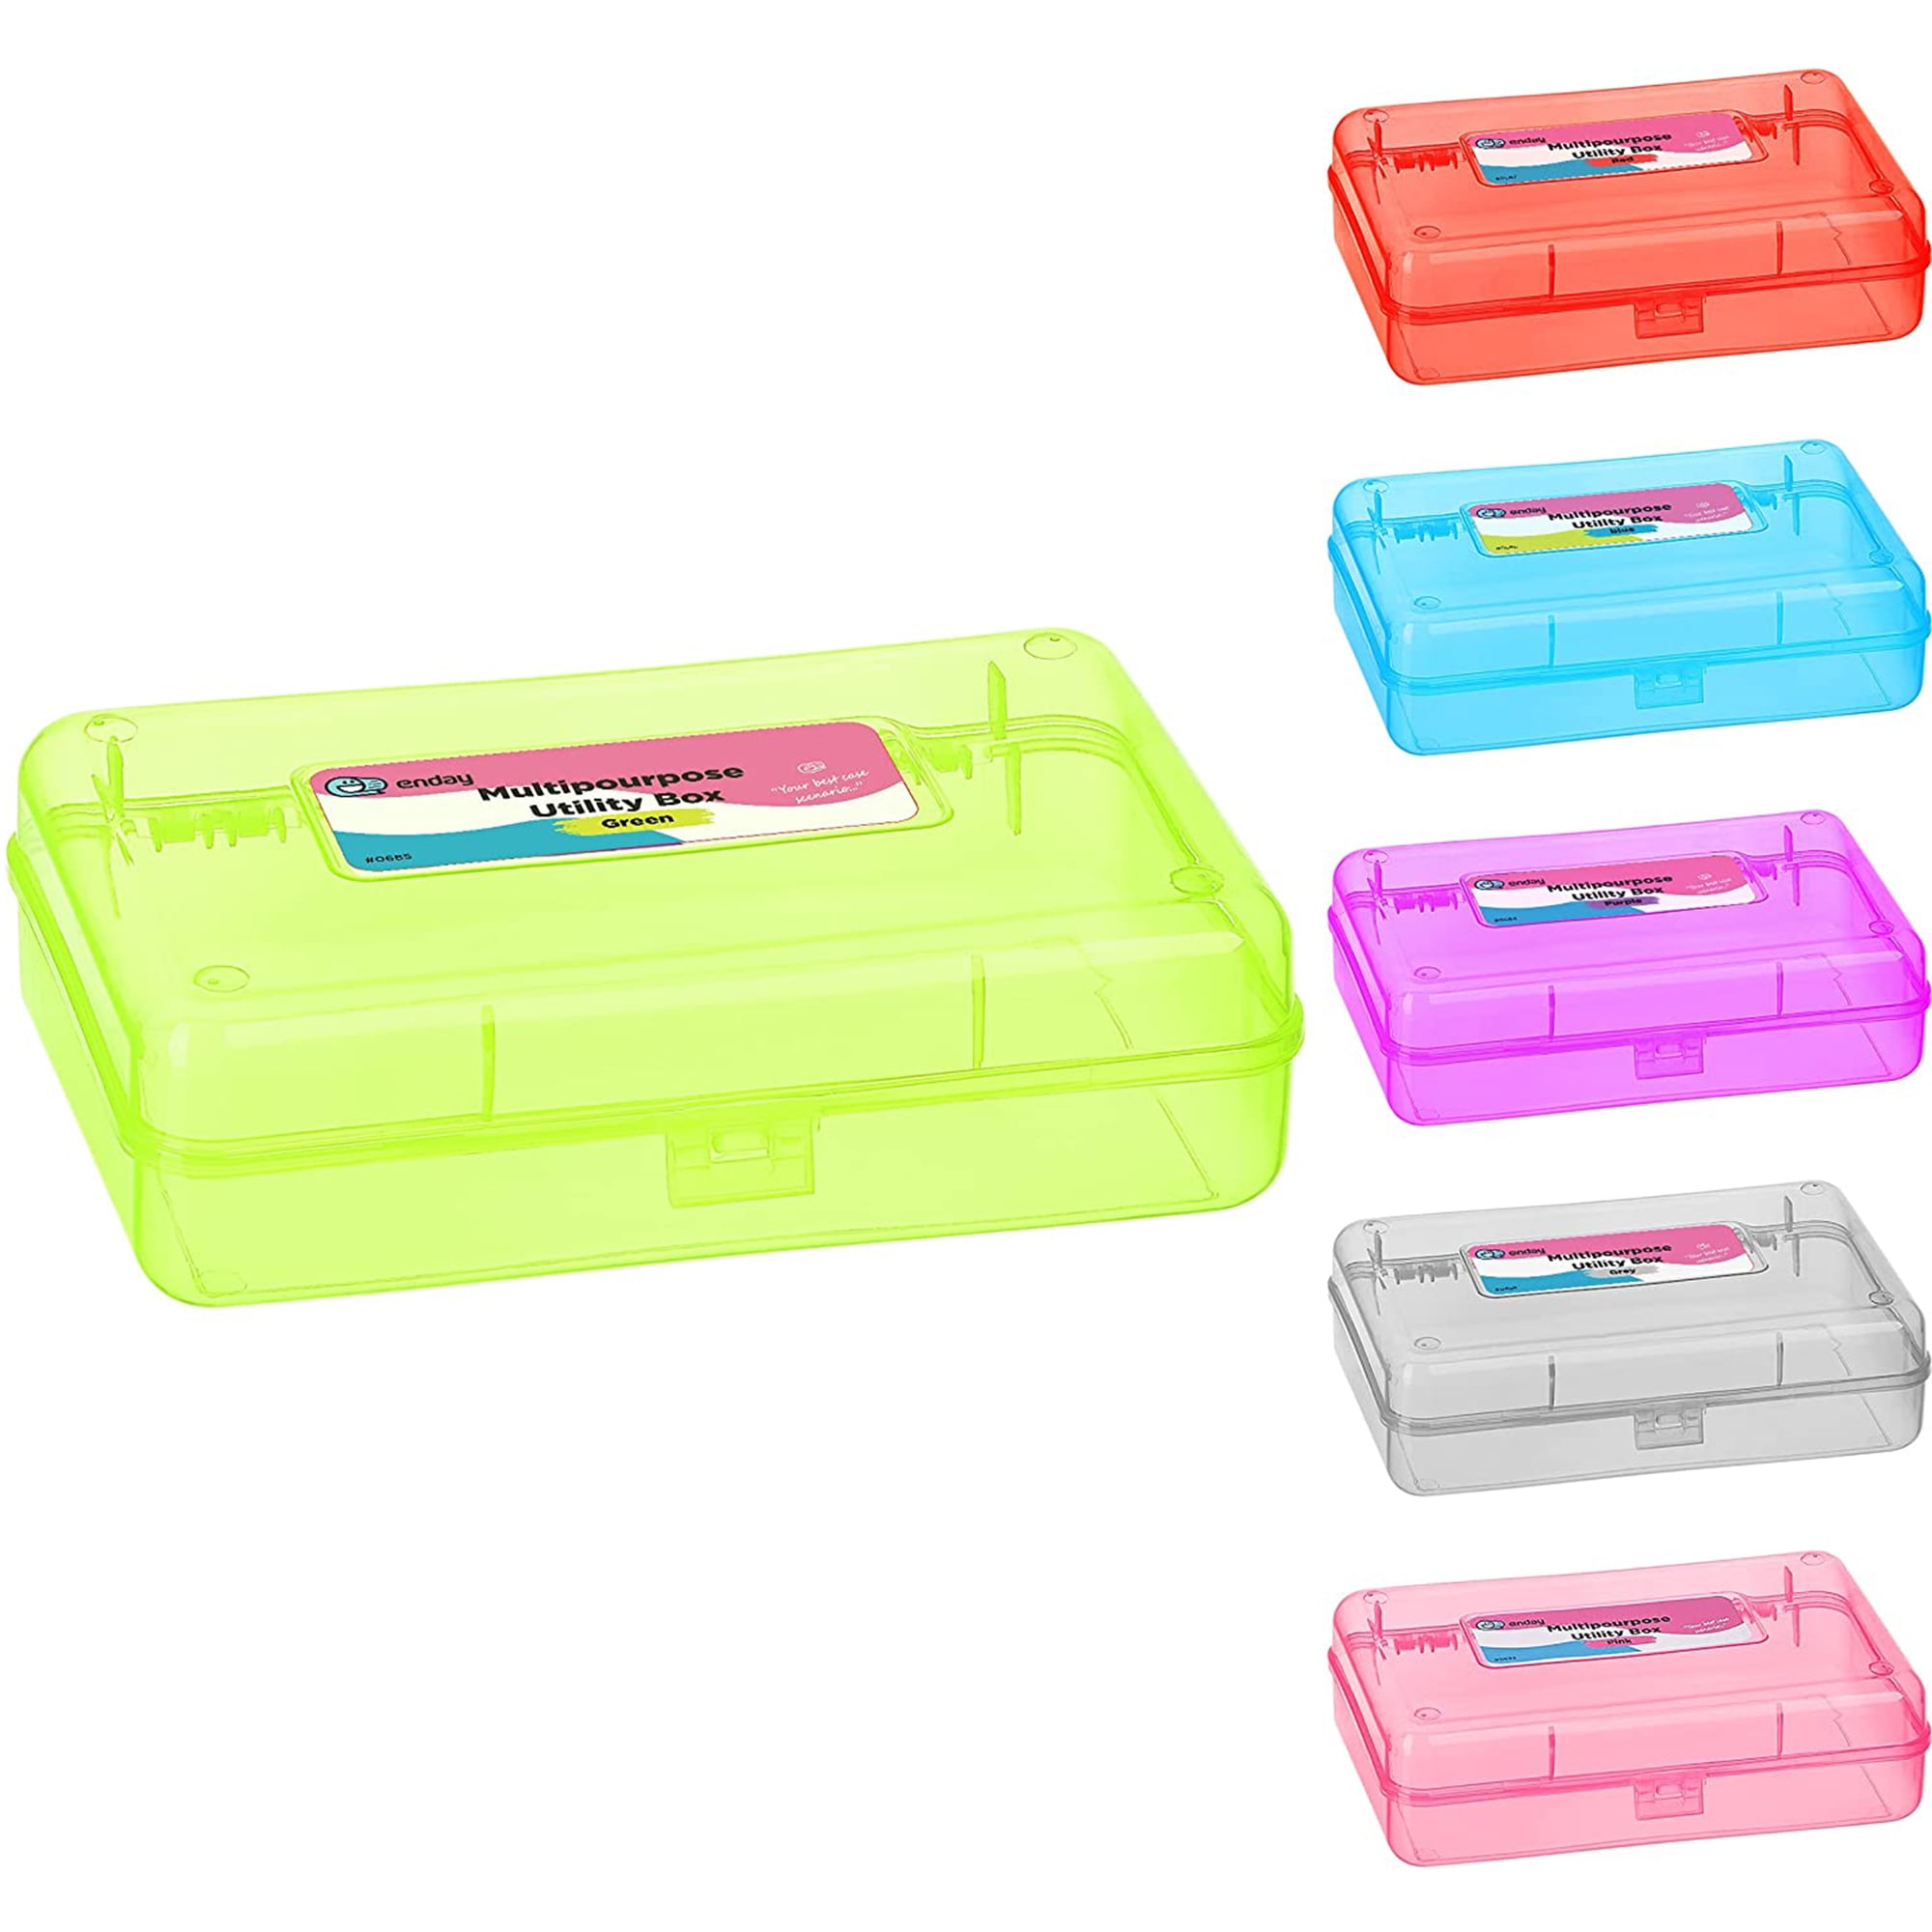 Enday Crayon Box Storage Containers, Clear Crayon Case, Plastic Crayon Boxes for Kids, Cards Small Supplies Organizers Boxes, Snap Closure, 1 Pack